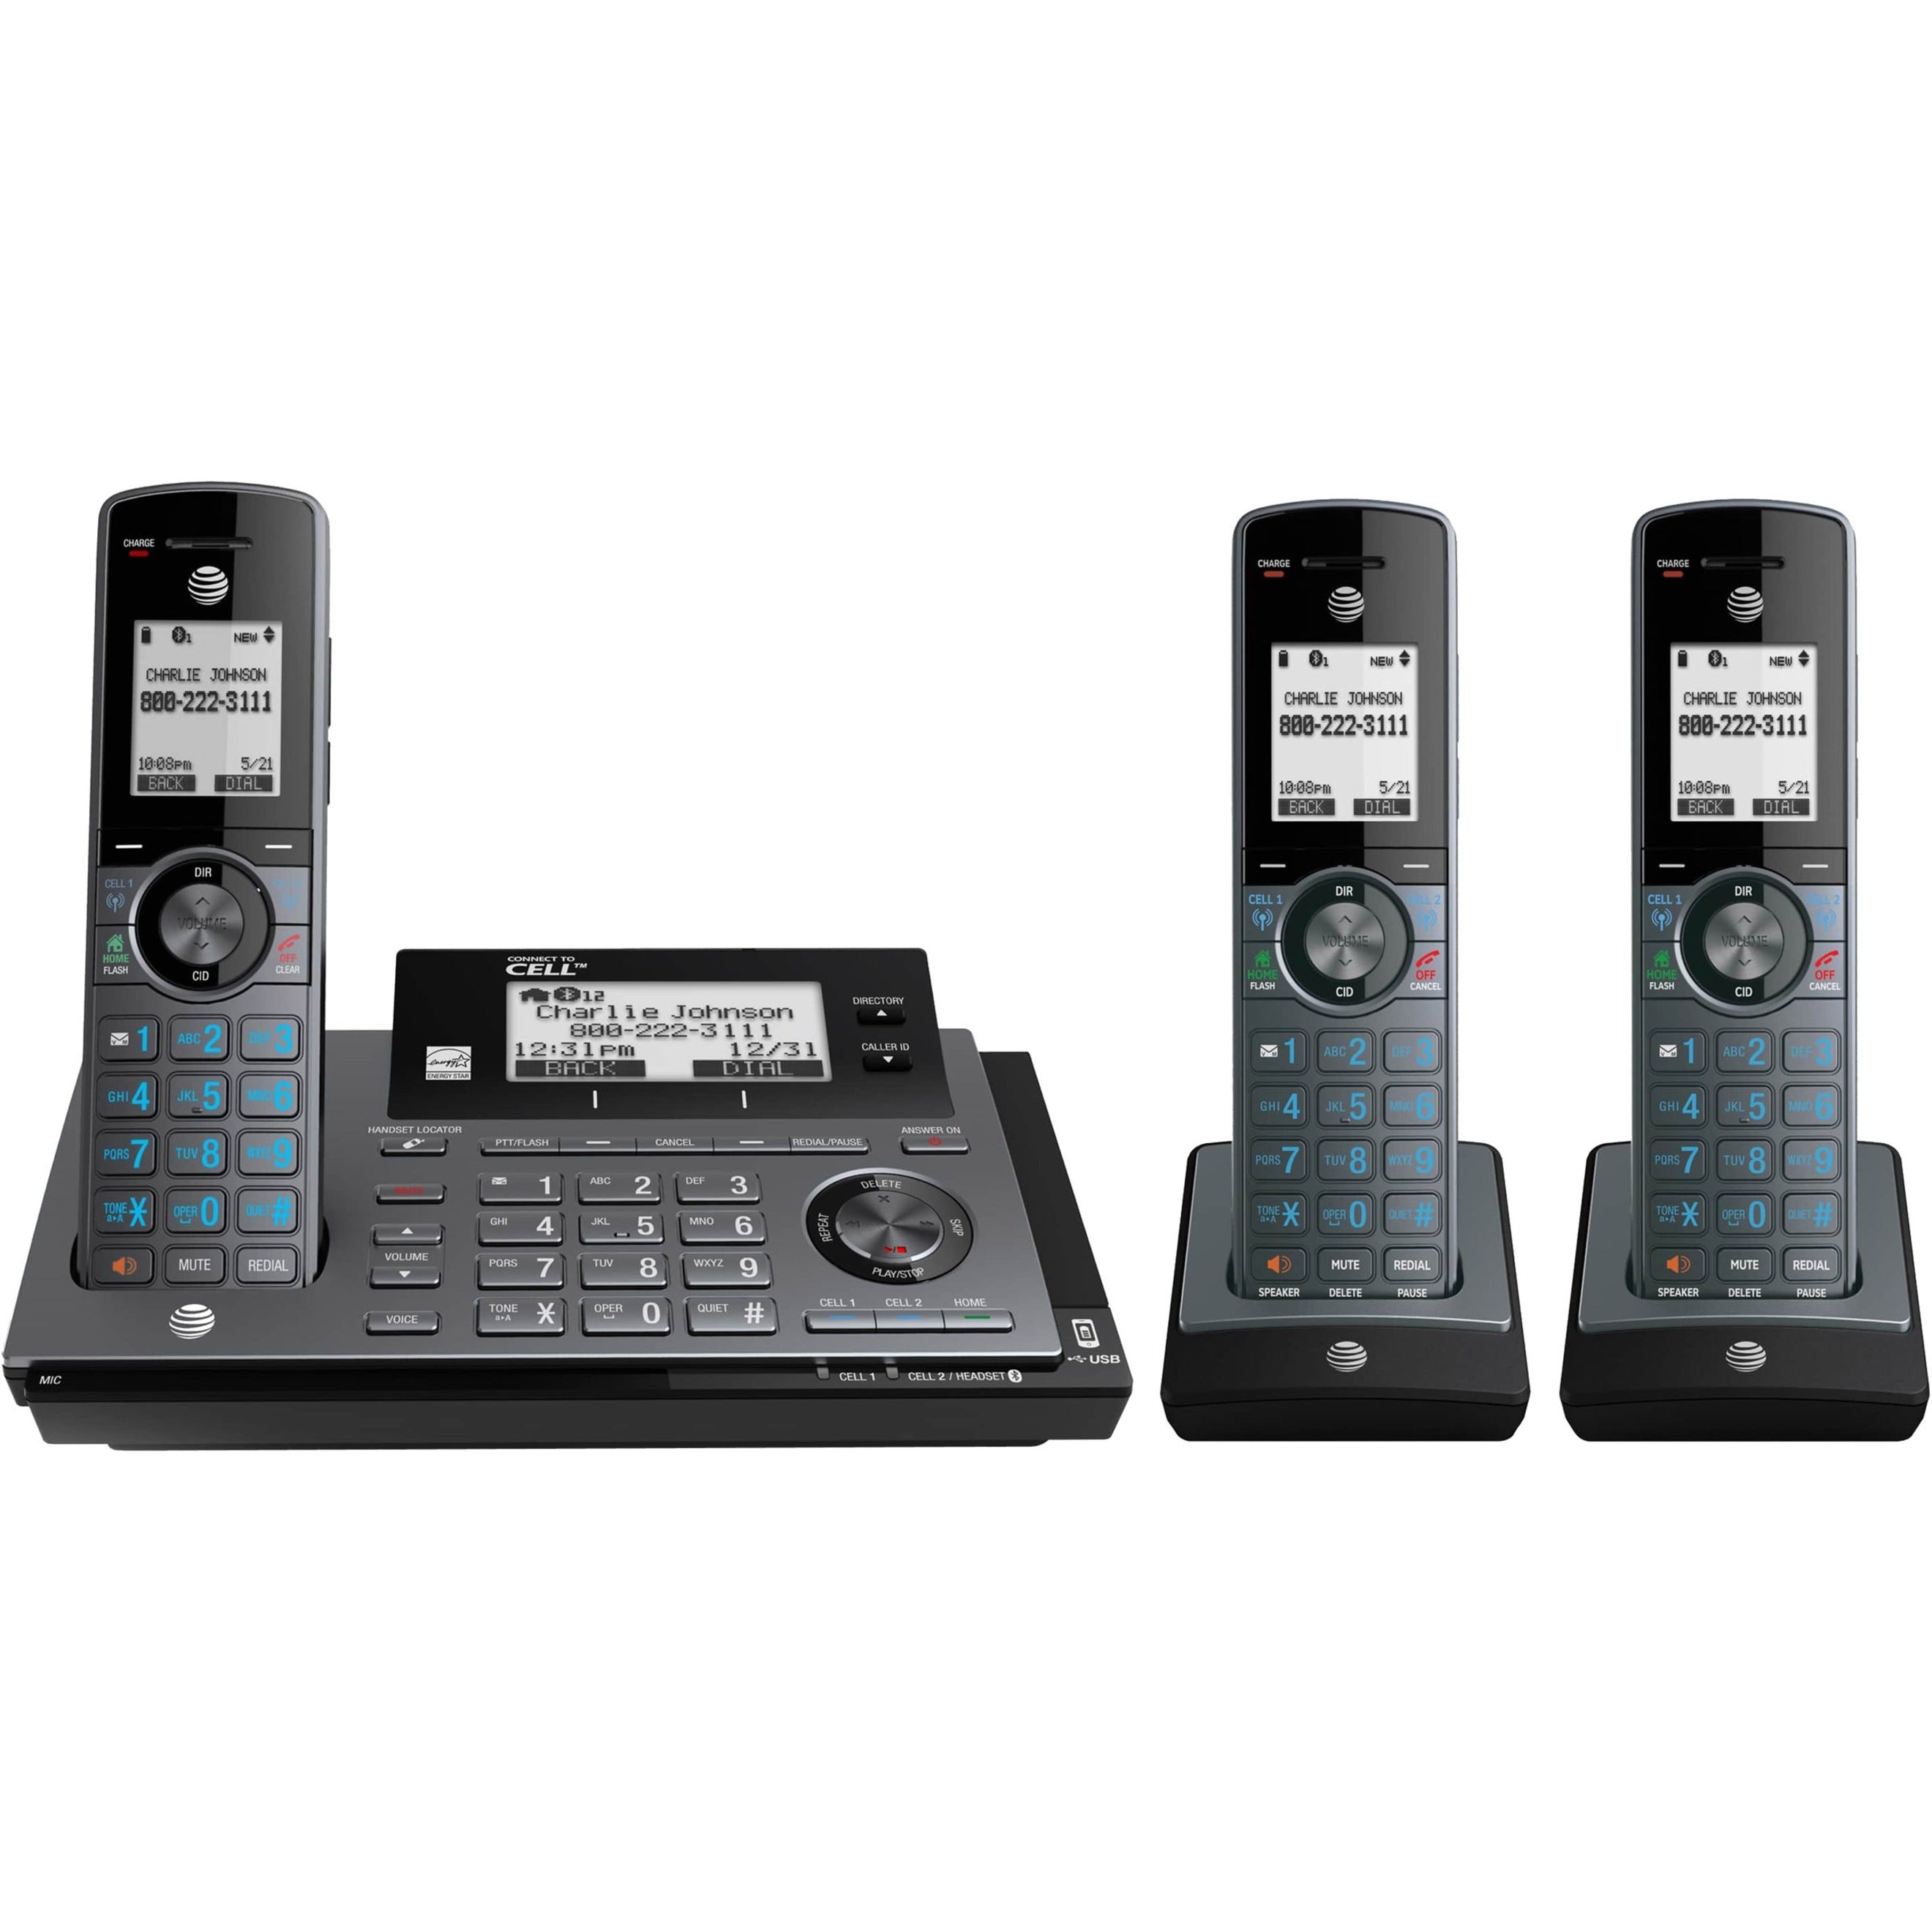 AT&T CLP99387 Connect to Cell 3 Handset Answering System with Smart Call Blocker, Bluetooth/DECT 6.0 Cordless Phone